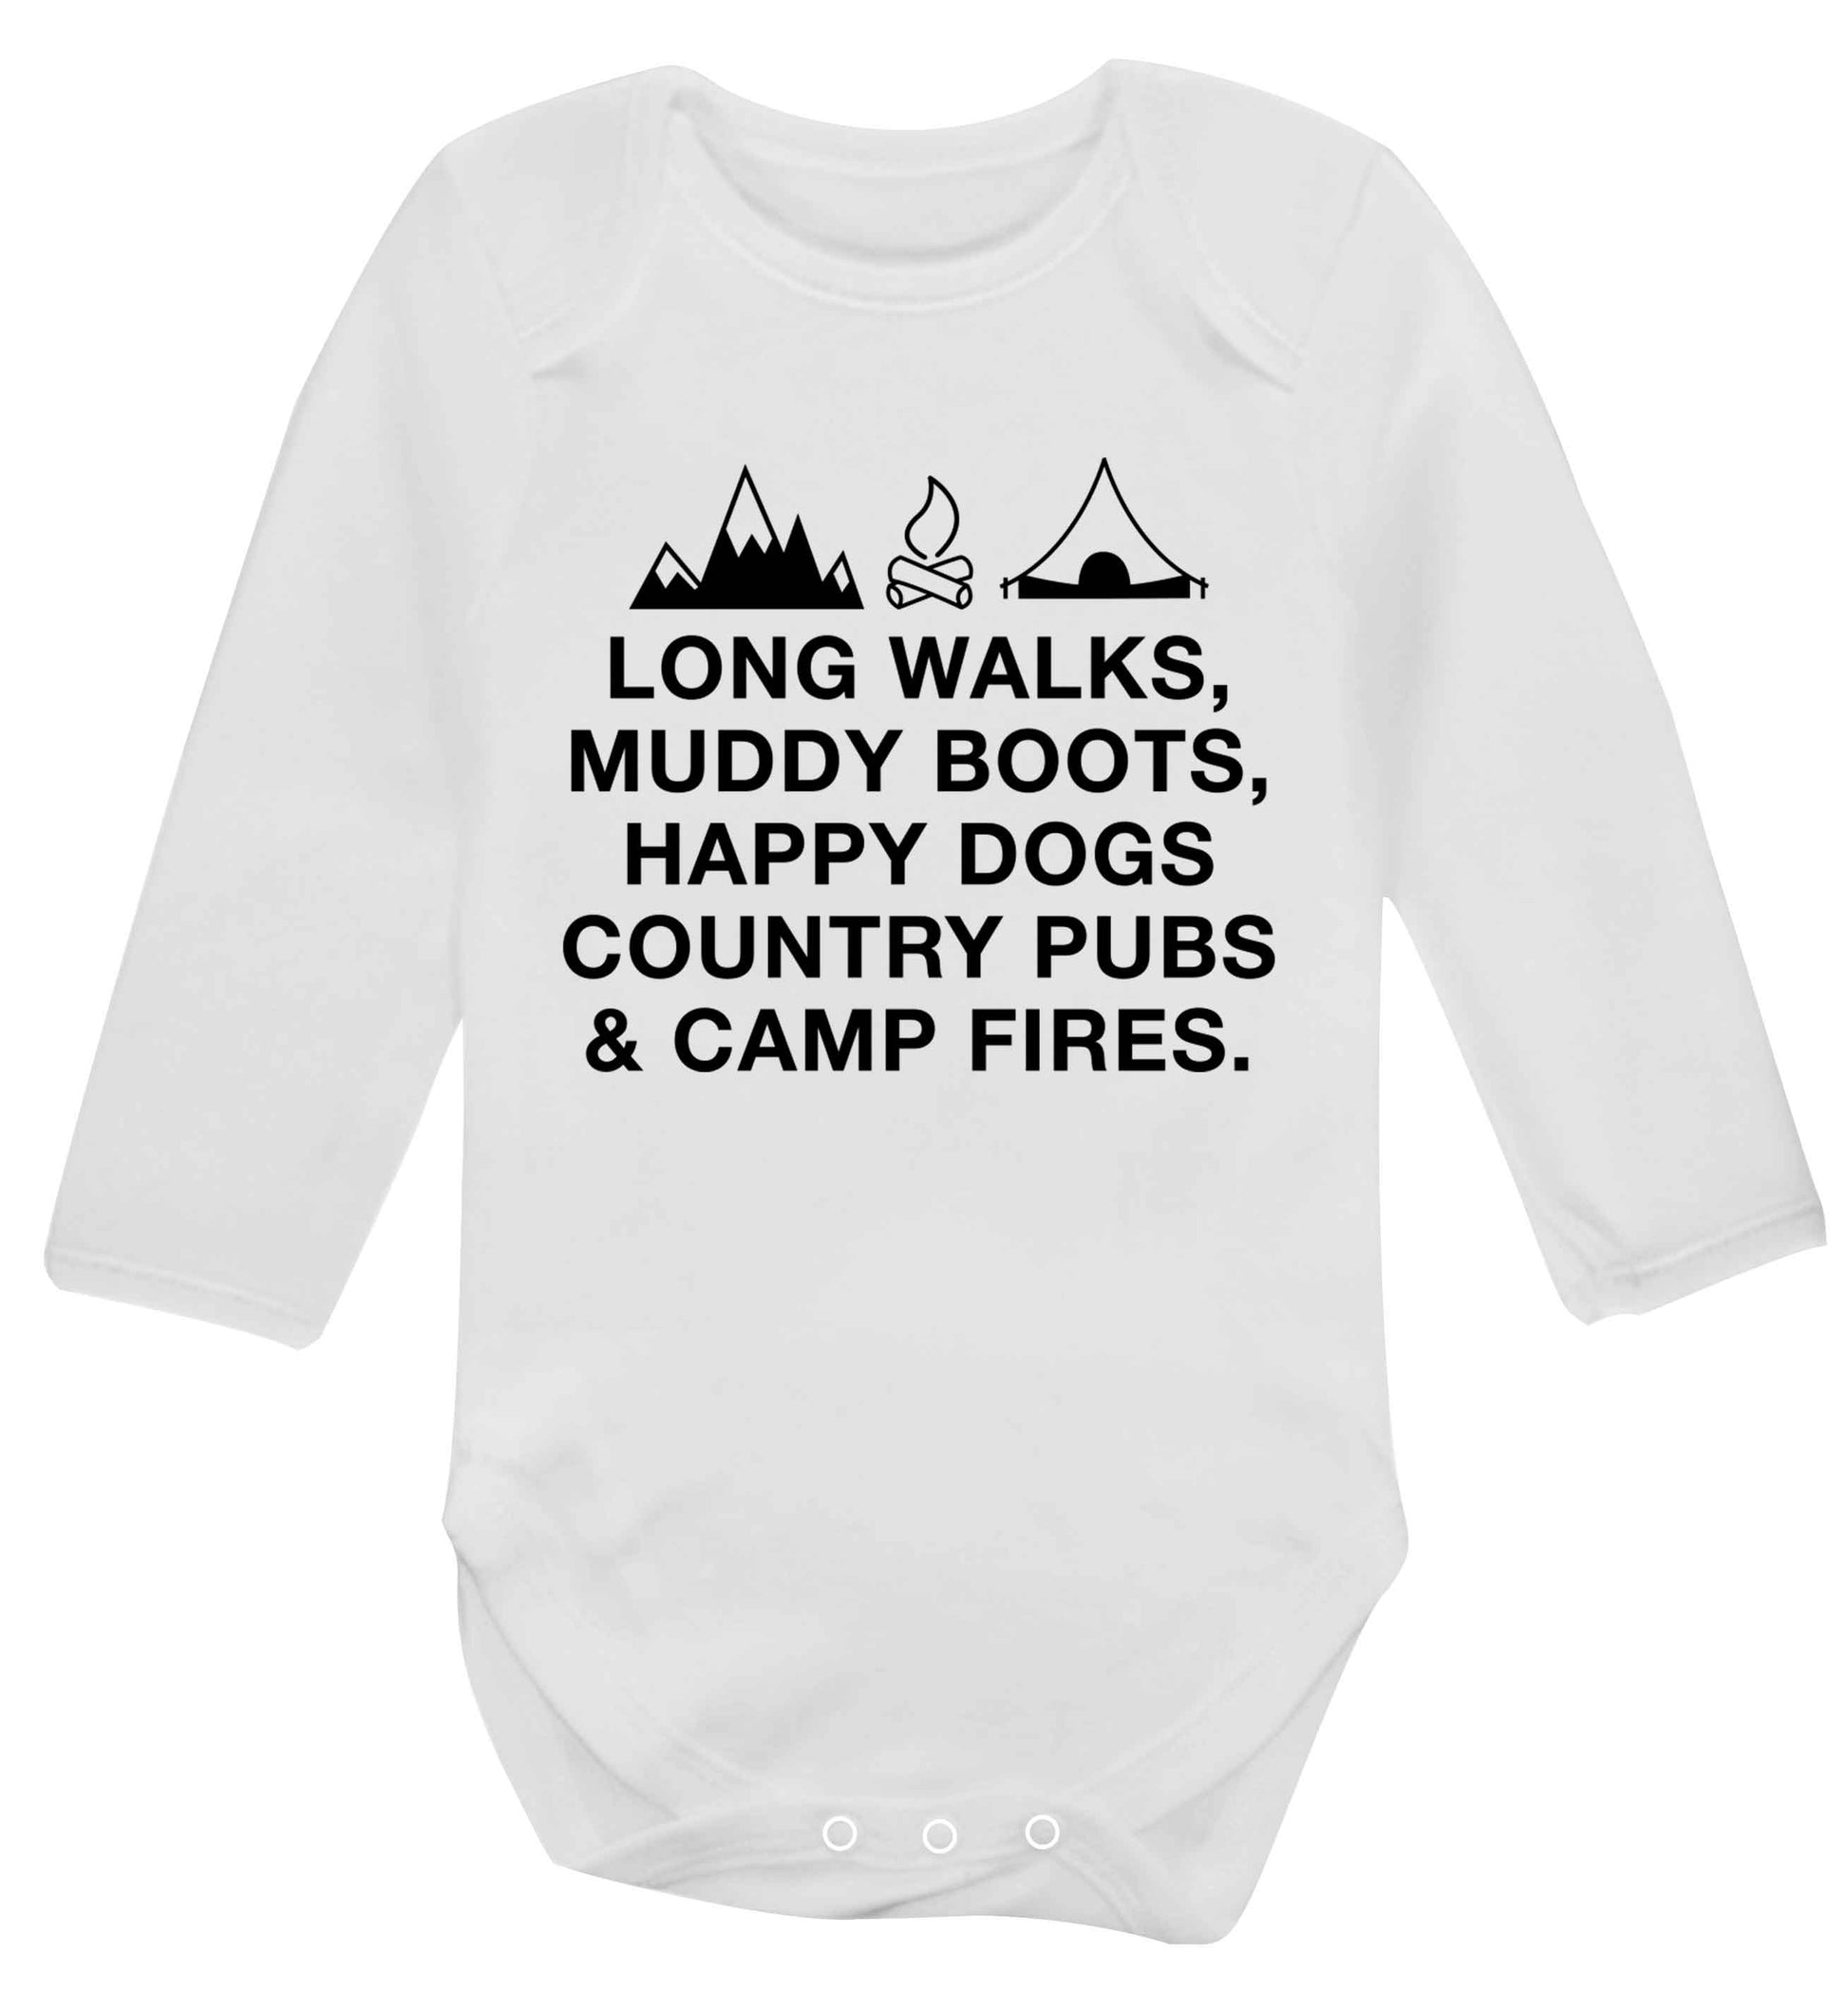 Long walks muddy boots happy dogs country pubs and camp fires Baby Vest long sleeved white 6-12 months